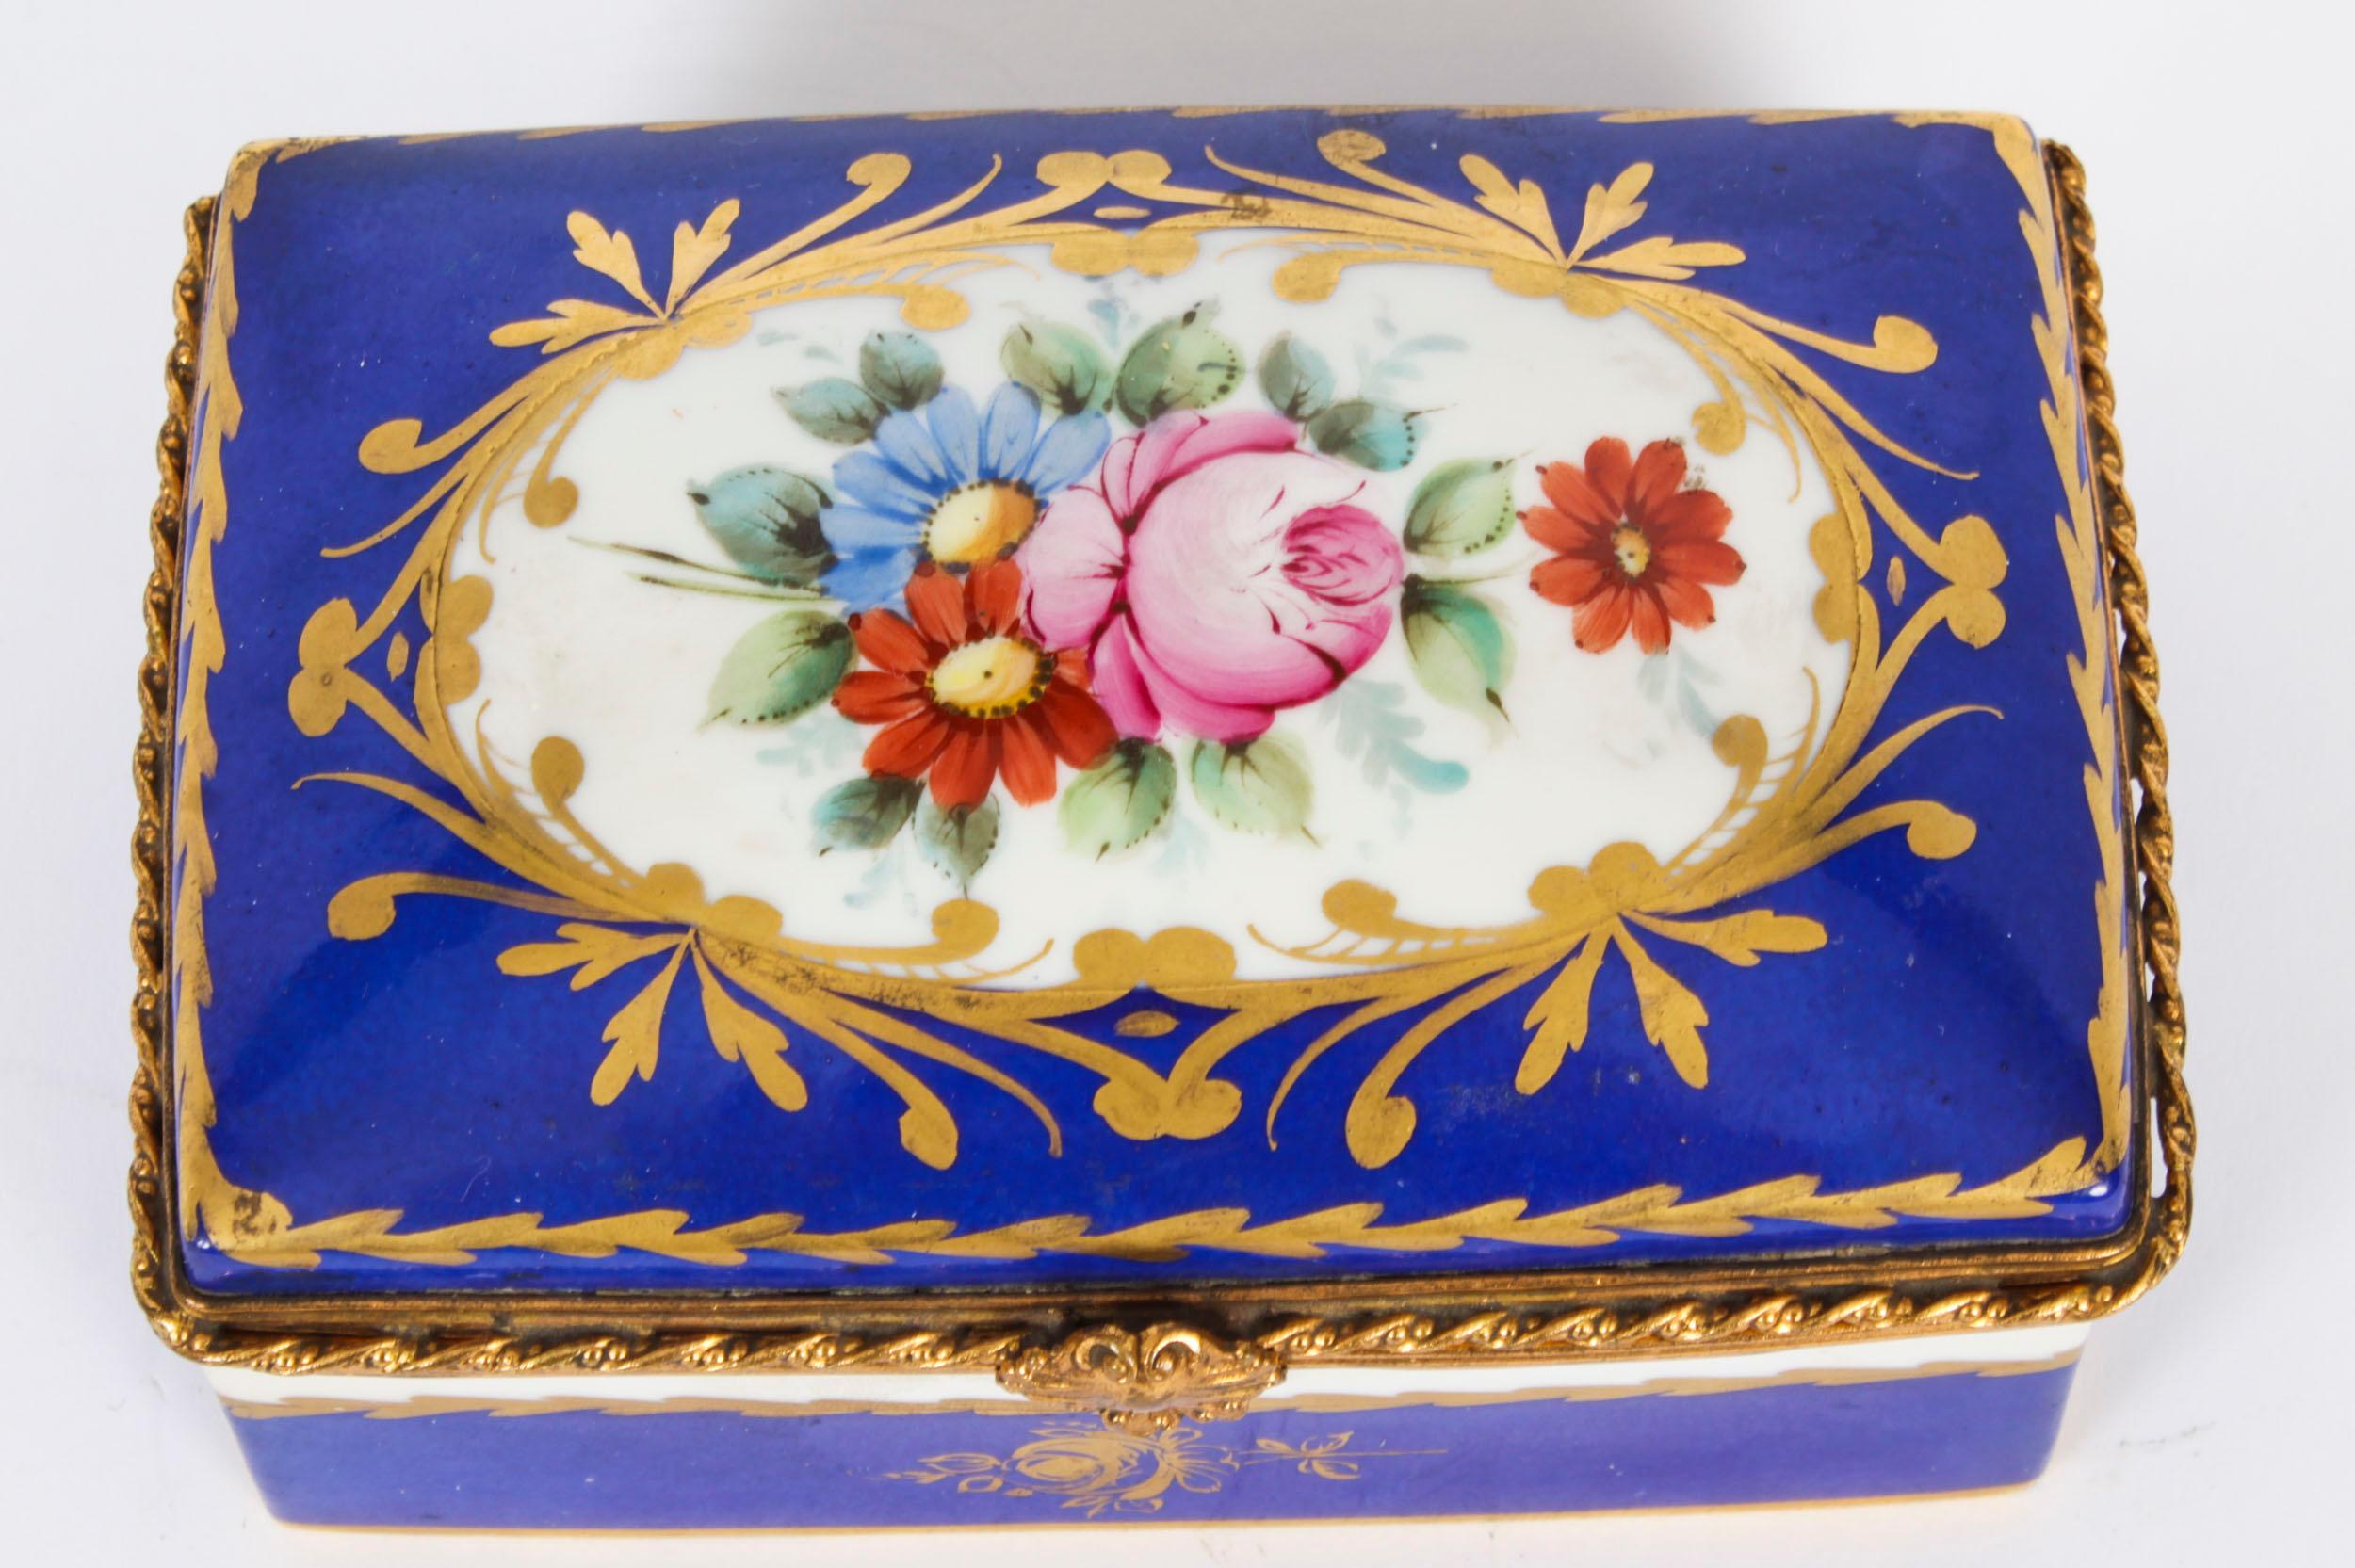 Antique Limoges Royal Blue Ormolu Mounted Casket Box 19h Century In Good Condition For Sale In London, GB